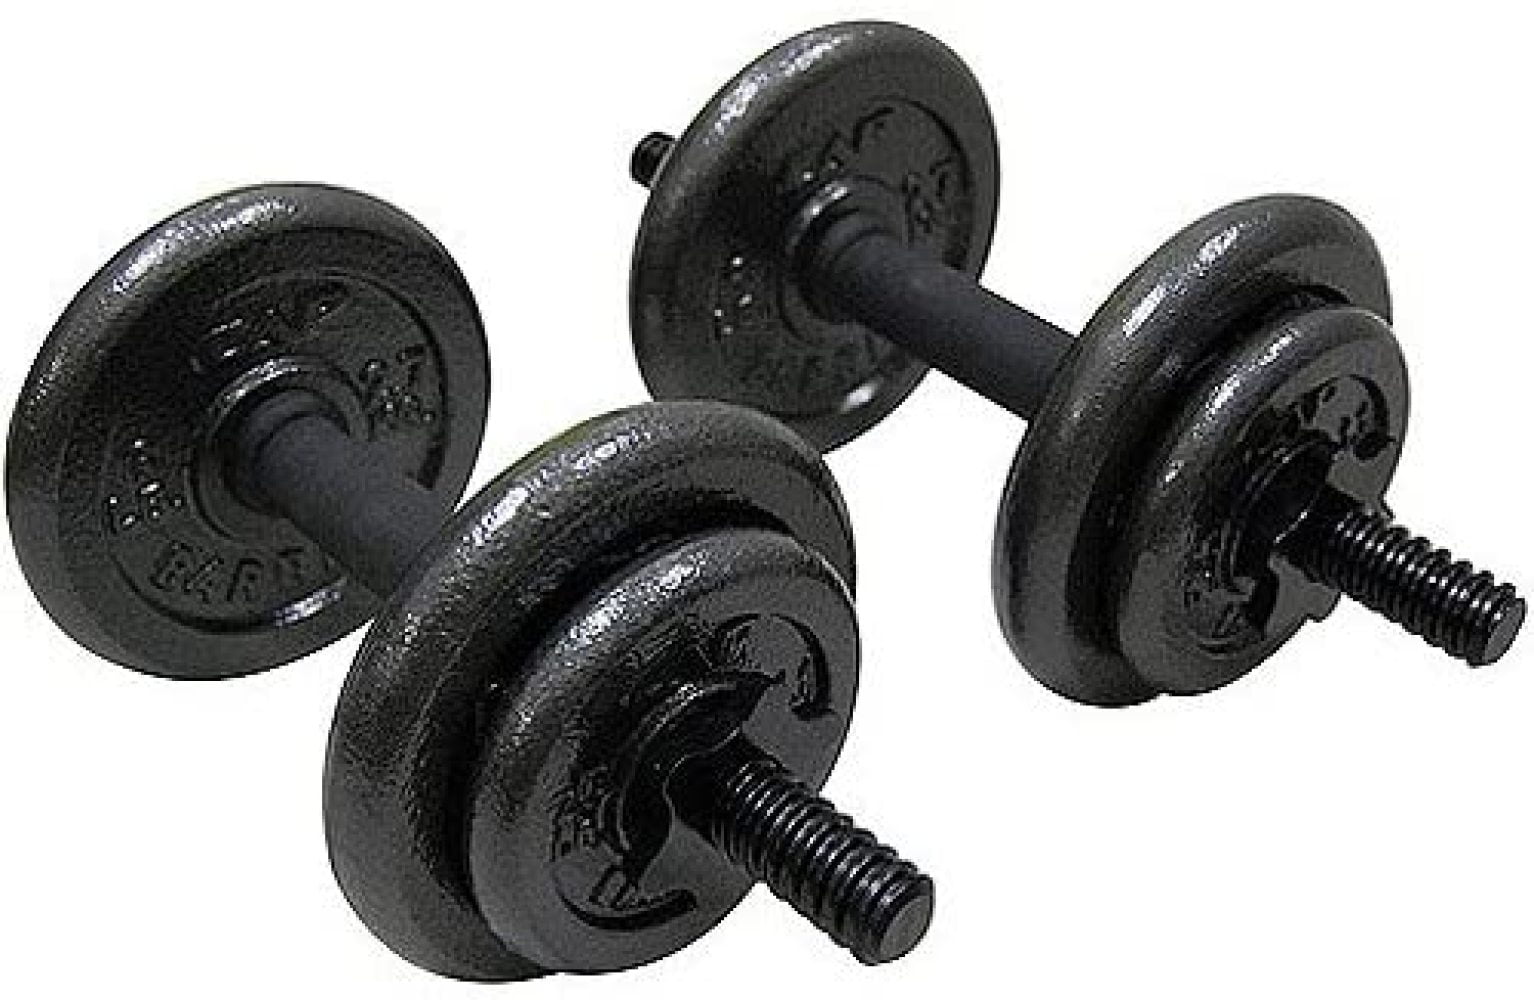 ➡️ GOLDS GYM 40 LB pound Vinyl Dumbbell Set Adjustable Hand Weights IN HAND!